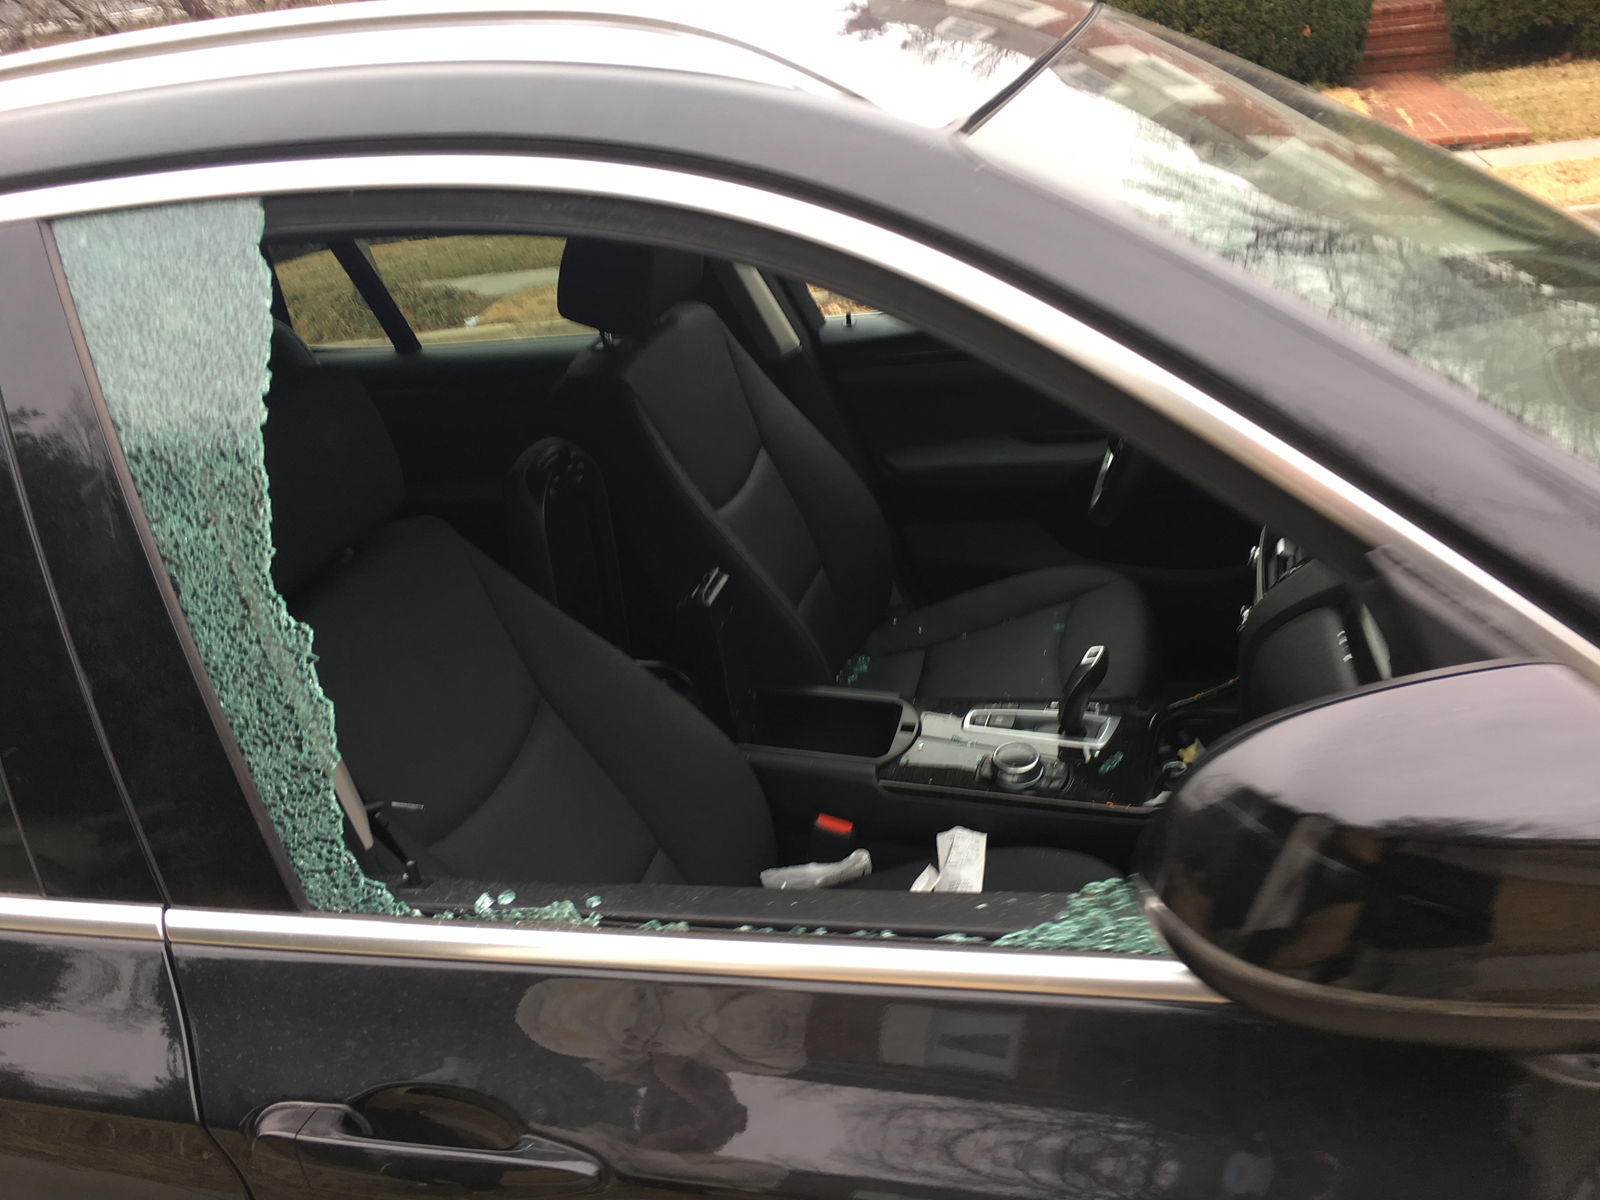 One of 47 cars that were broken into at some point on Wednesday night-Thursday morning in the D.C. Sheppard Park neighborhood. (Courtesy D.C. resident)